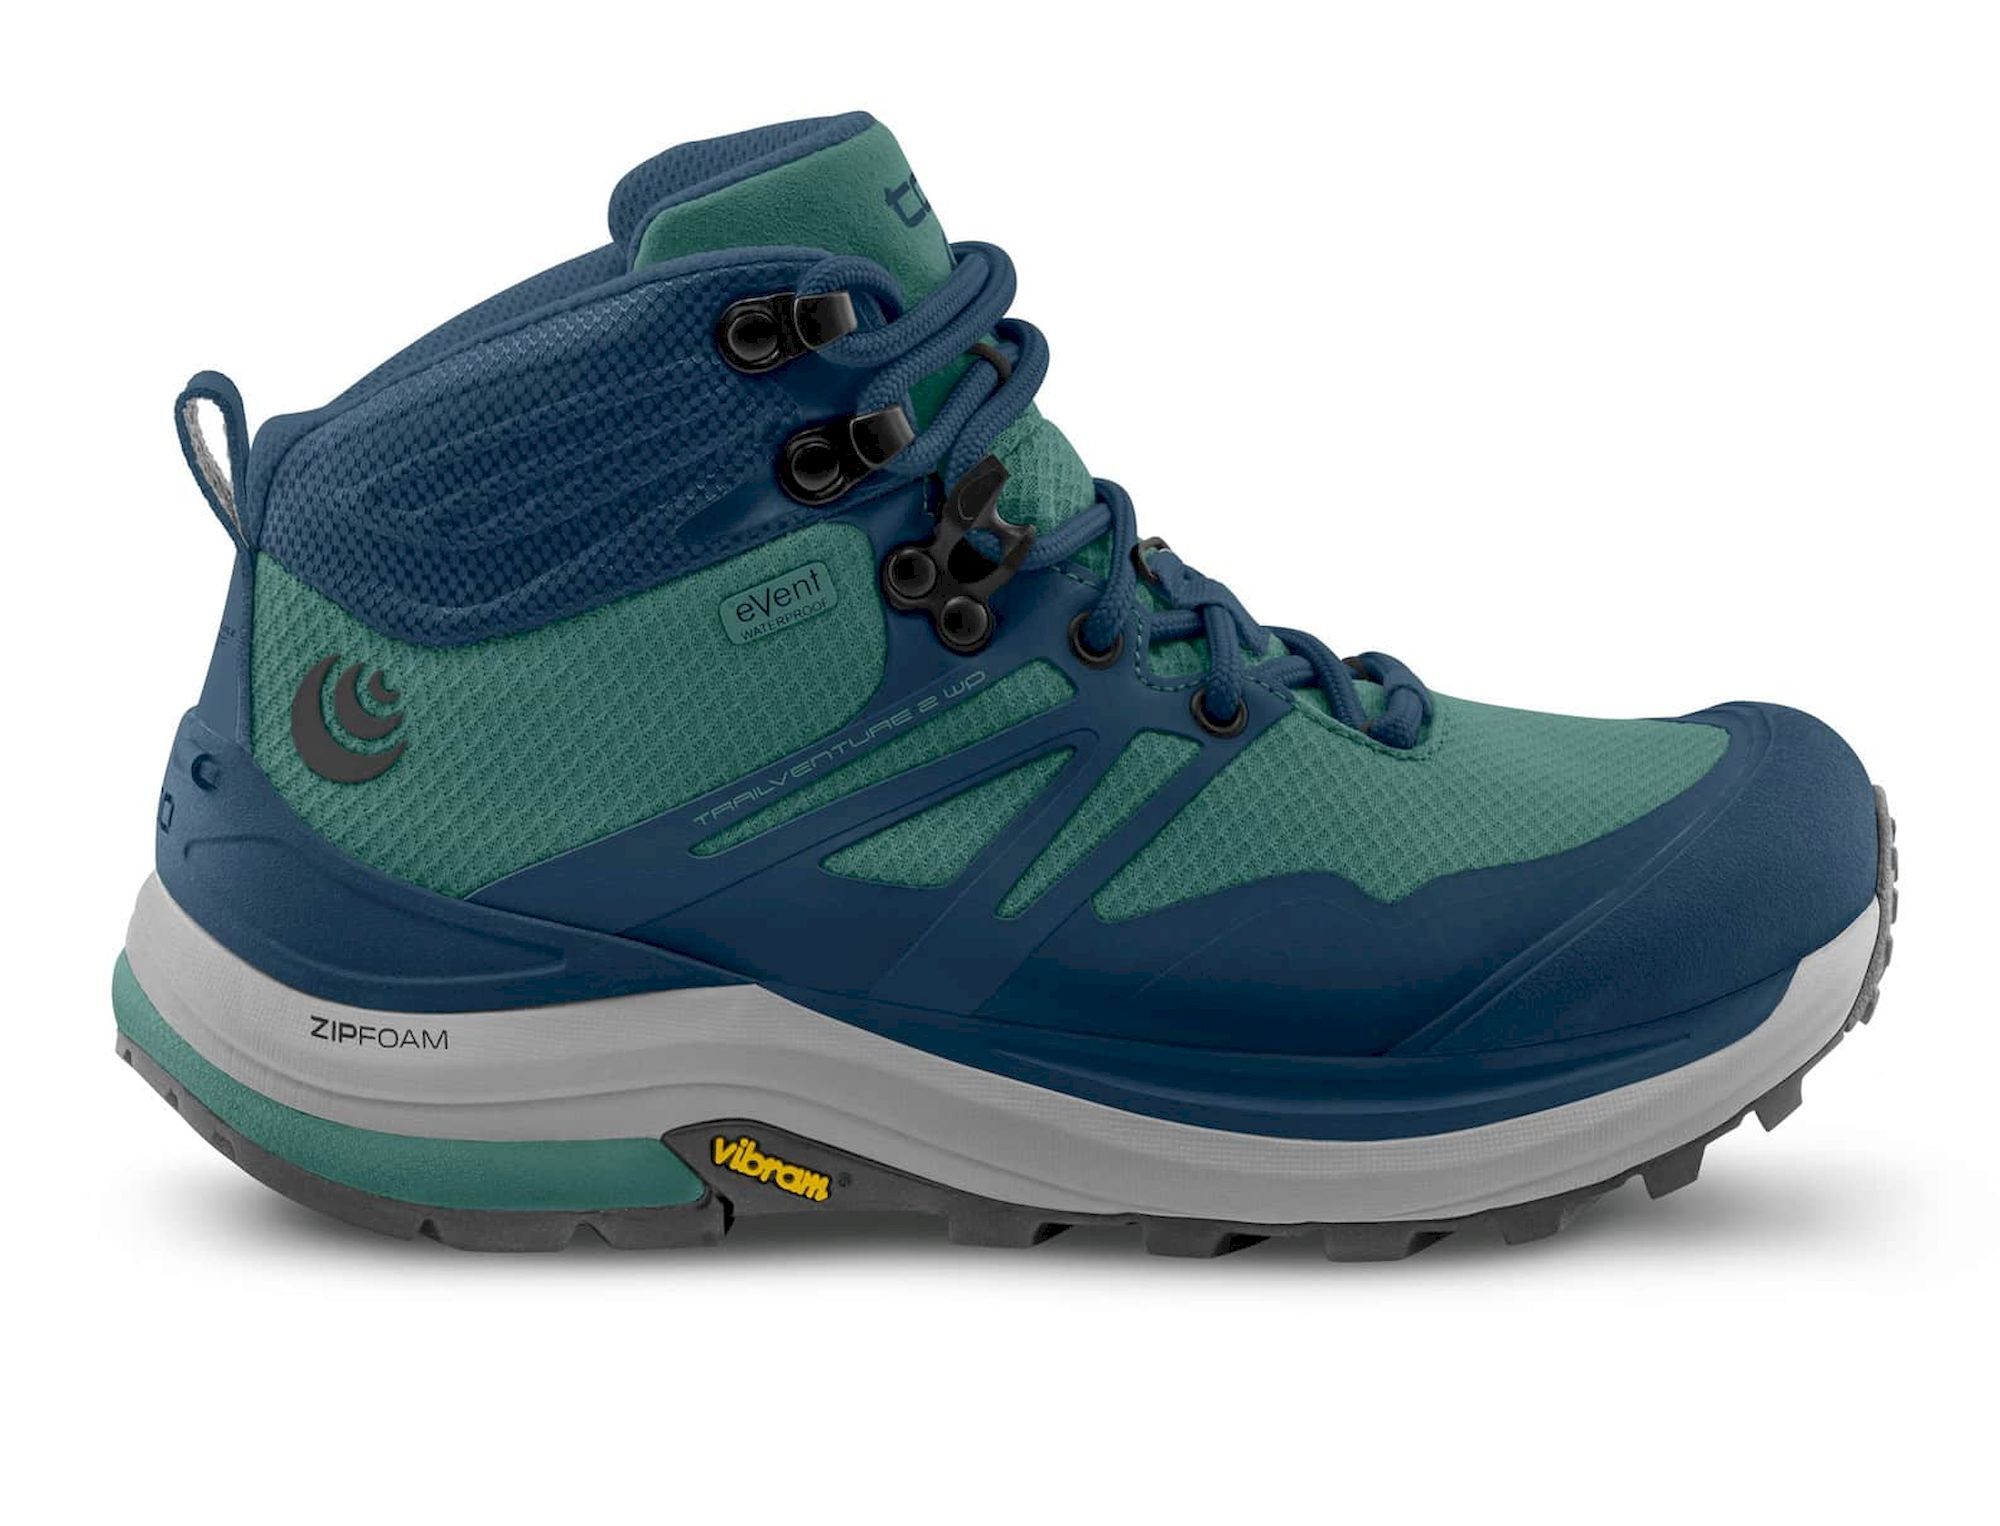 Topo Athletic Trailventure 2 WP - Hiking shoes - Women's